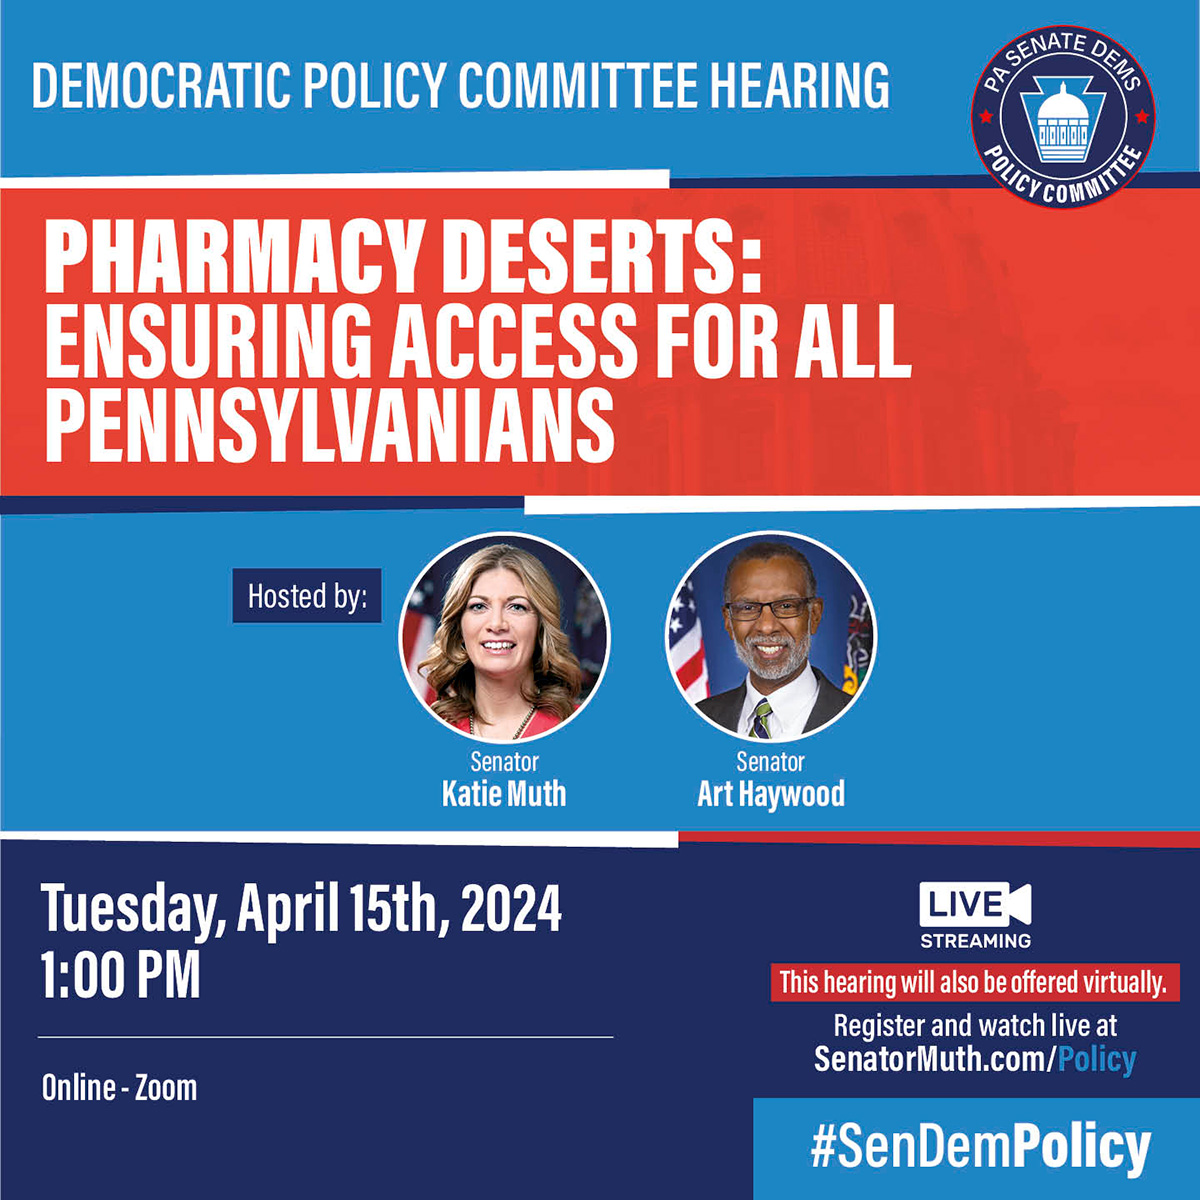 Policy Hearing - Pharmacy Deserts: Ensuring Access for All Pennsylvanians - April 15, 2024